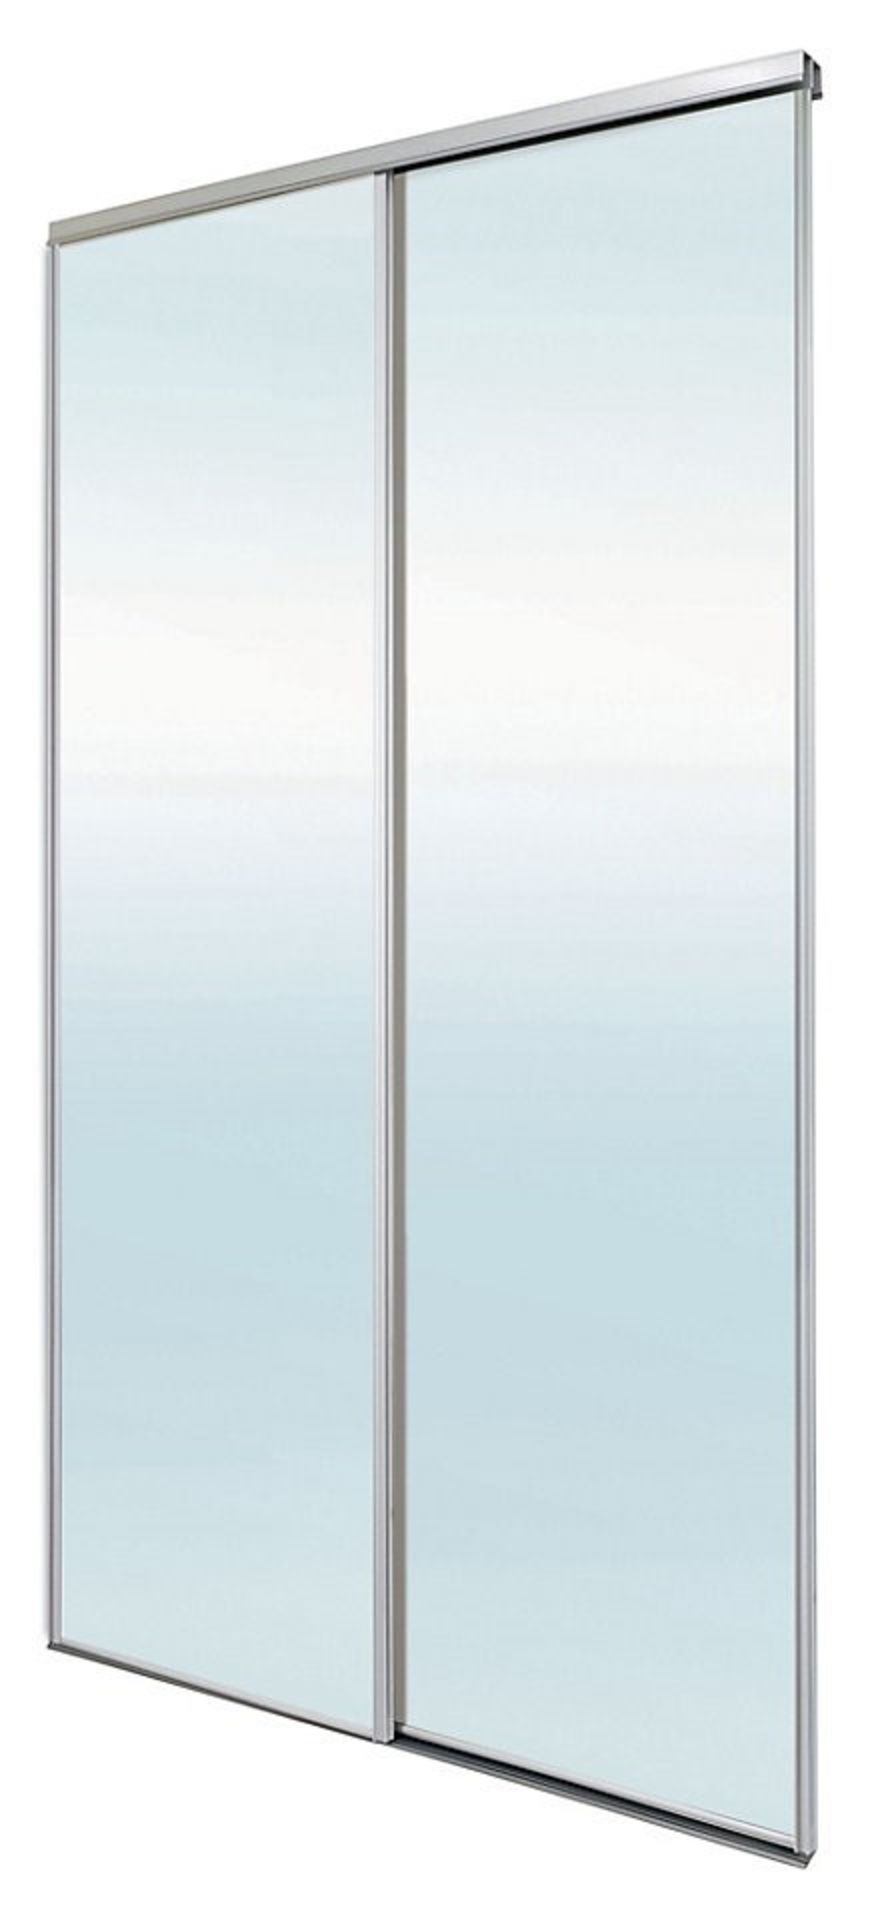 1 x BLIZZ Pack of 2 Silver Mirror Sliding Wardrobe Doors With Grey Lacquered Steel Track Sets And Pr